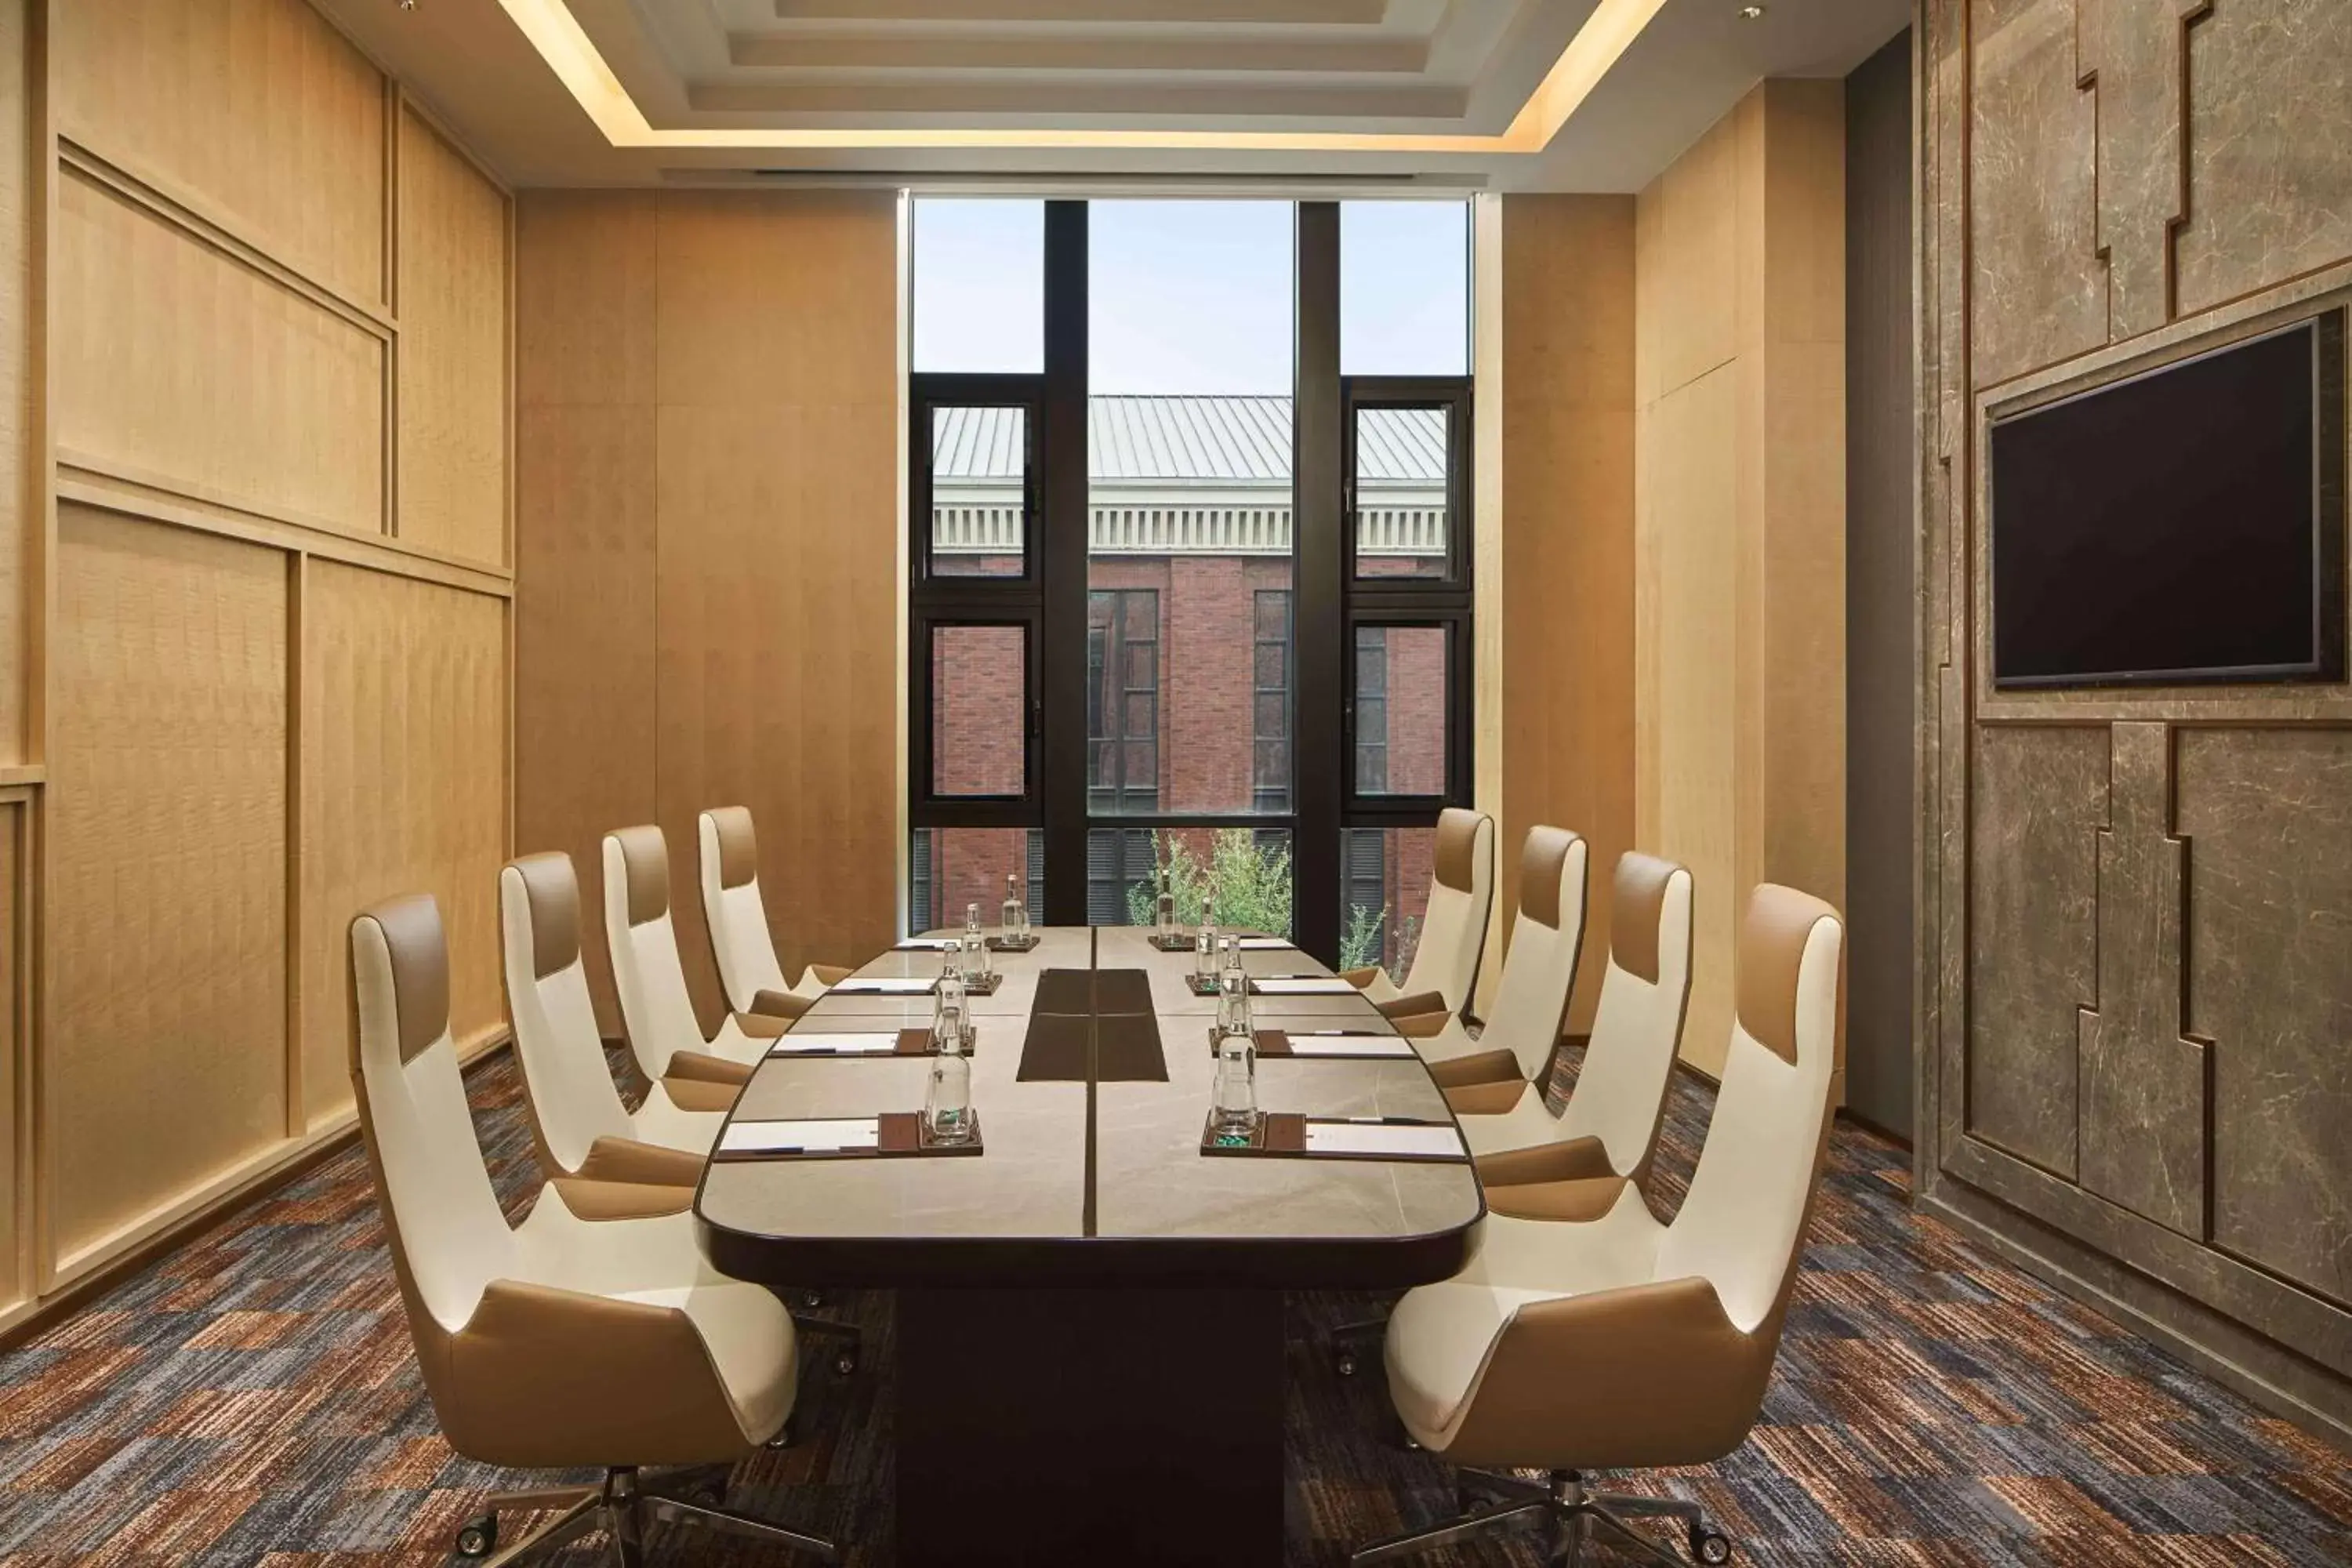 Meeting/conference room in Conrad Tianjin